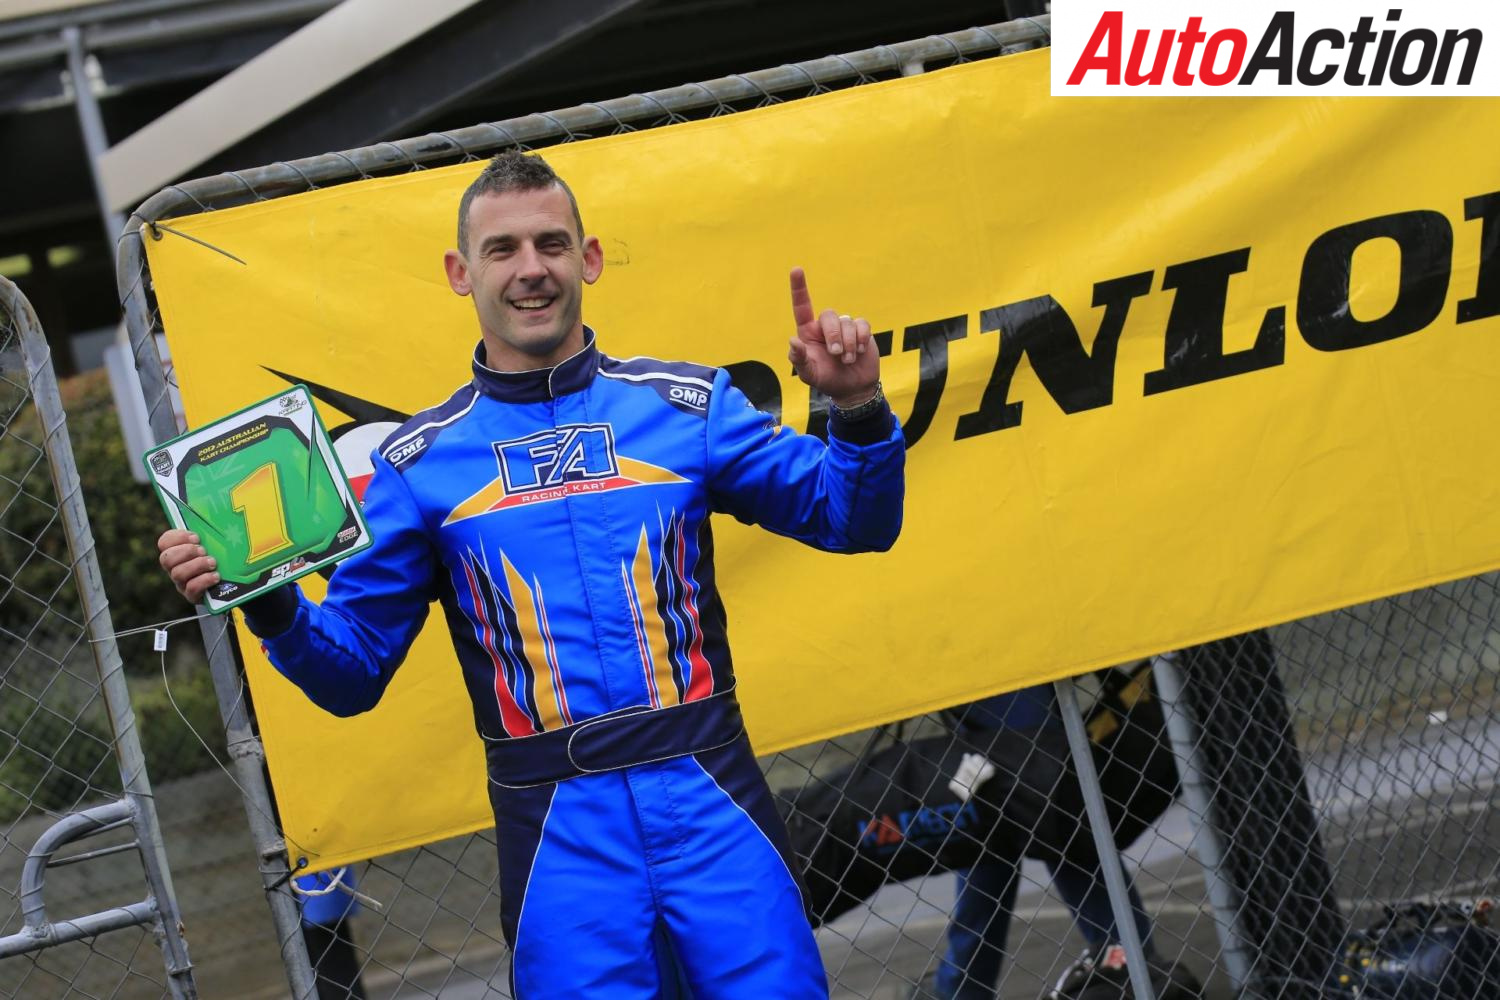 James Sera became a five-time Australian Karting Champion in Melbourne - Photo: Coopers Photography